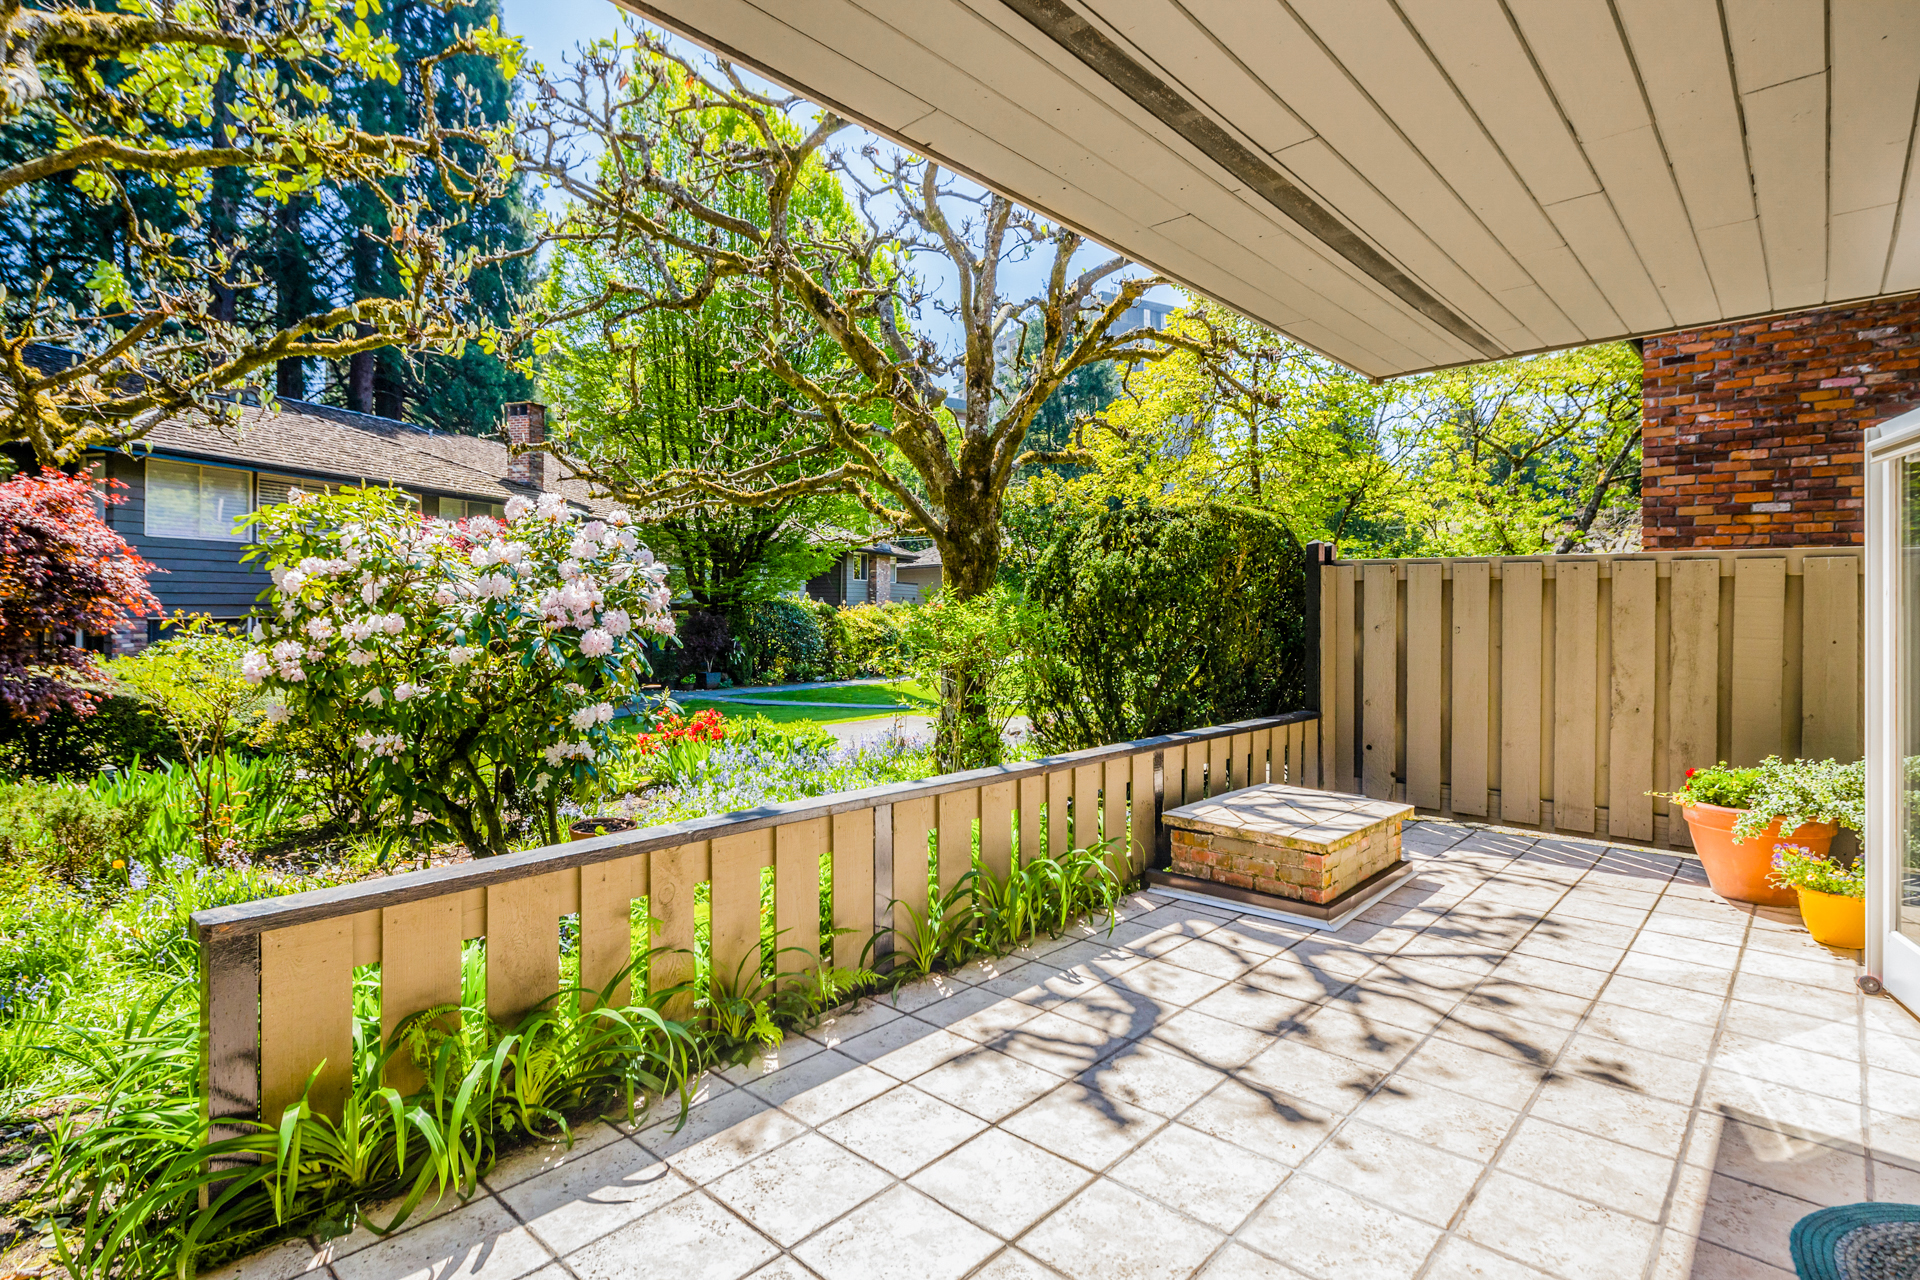 603 235 Keith Road, Spuraway Gardens, West Vancouver - For Sale - Image 1